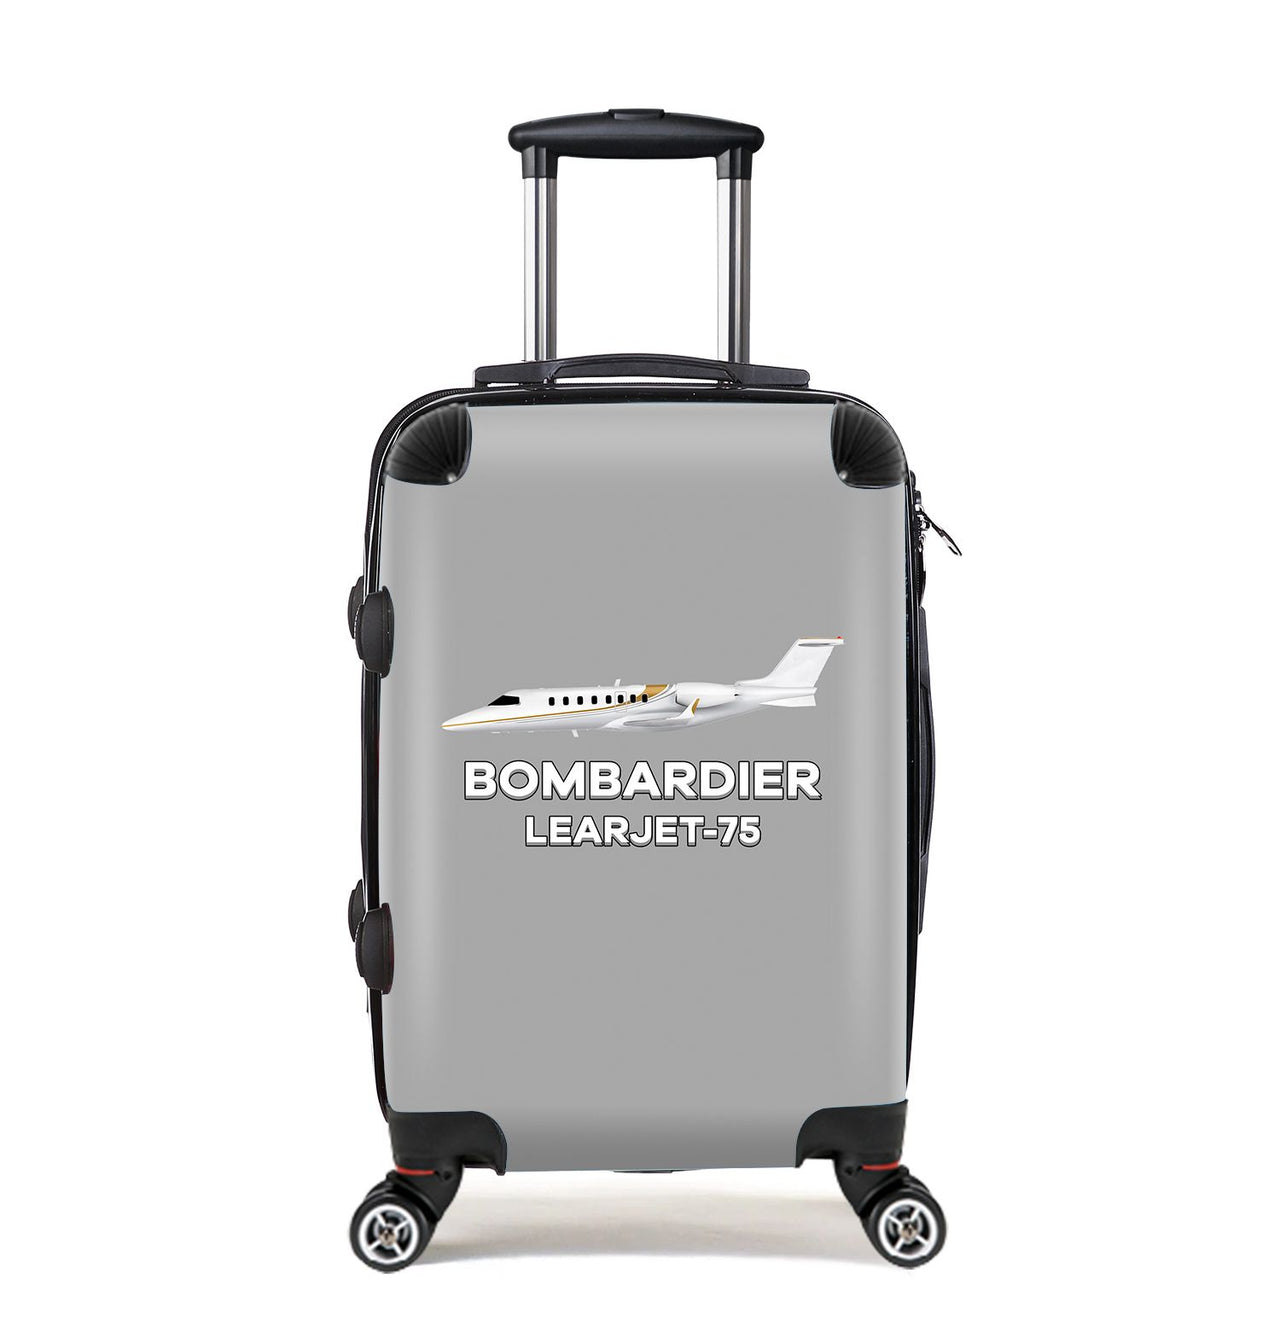 The Bombardier Learjet 75 Designed Cabin Size Luggages